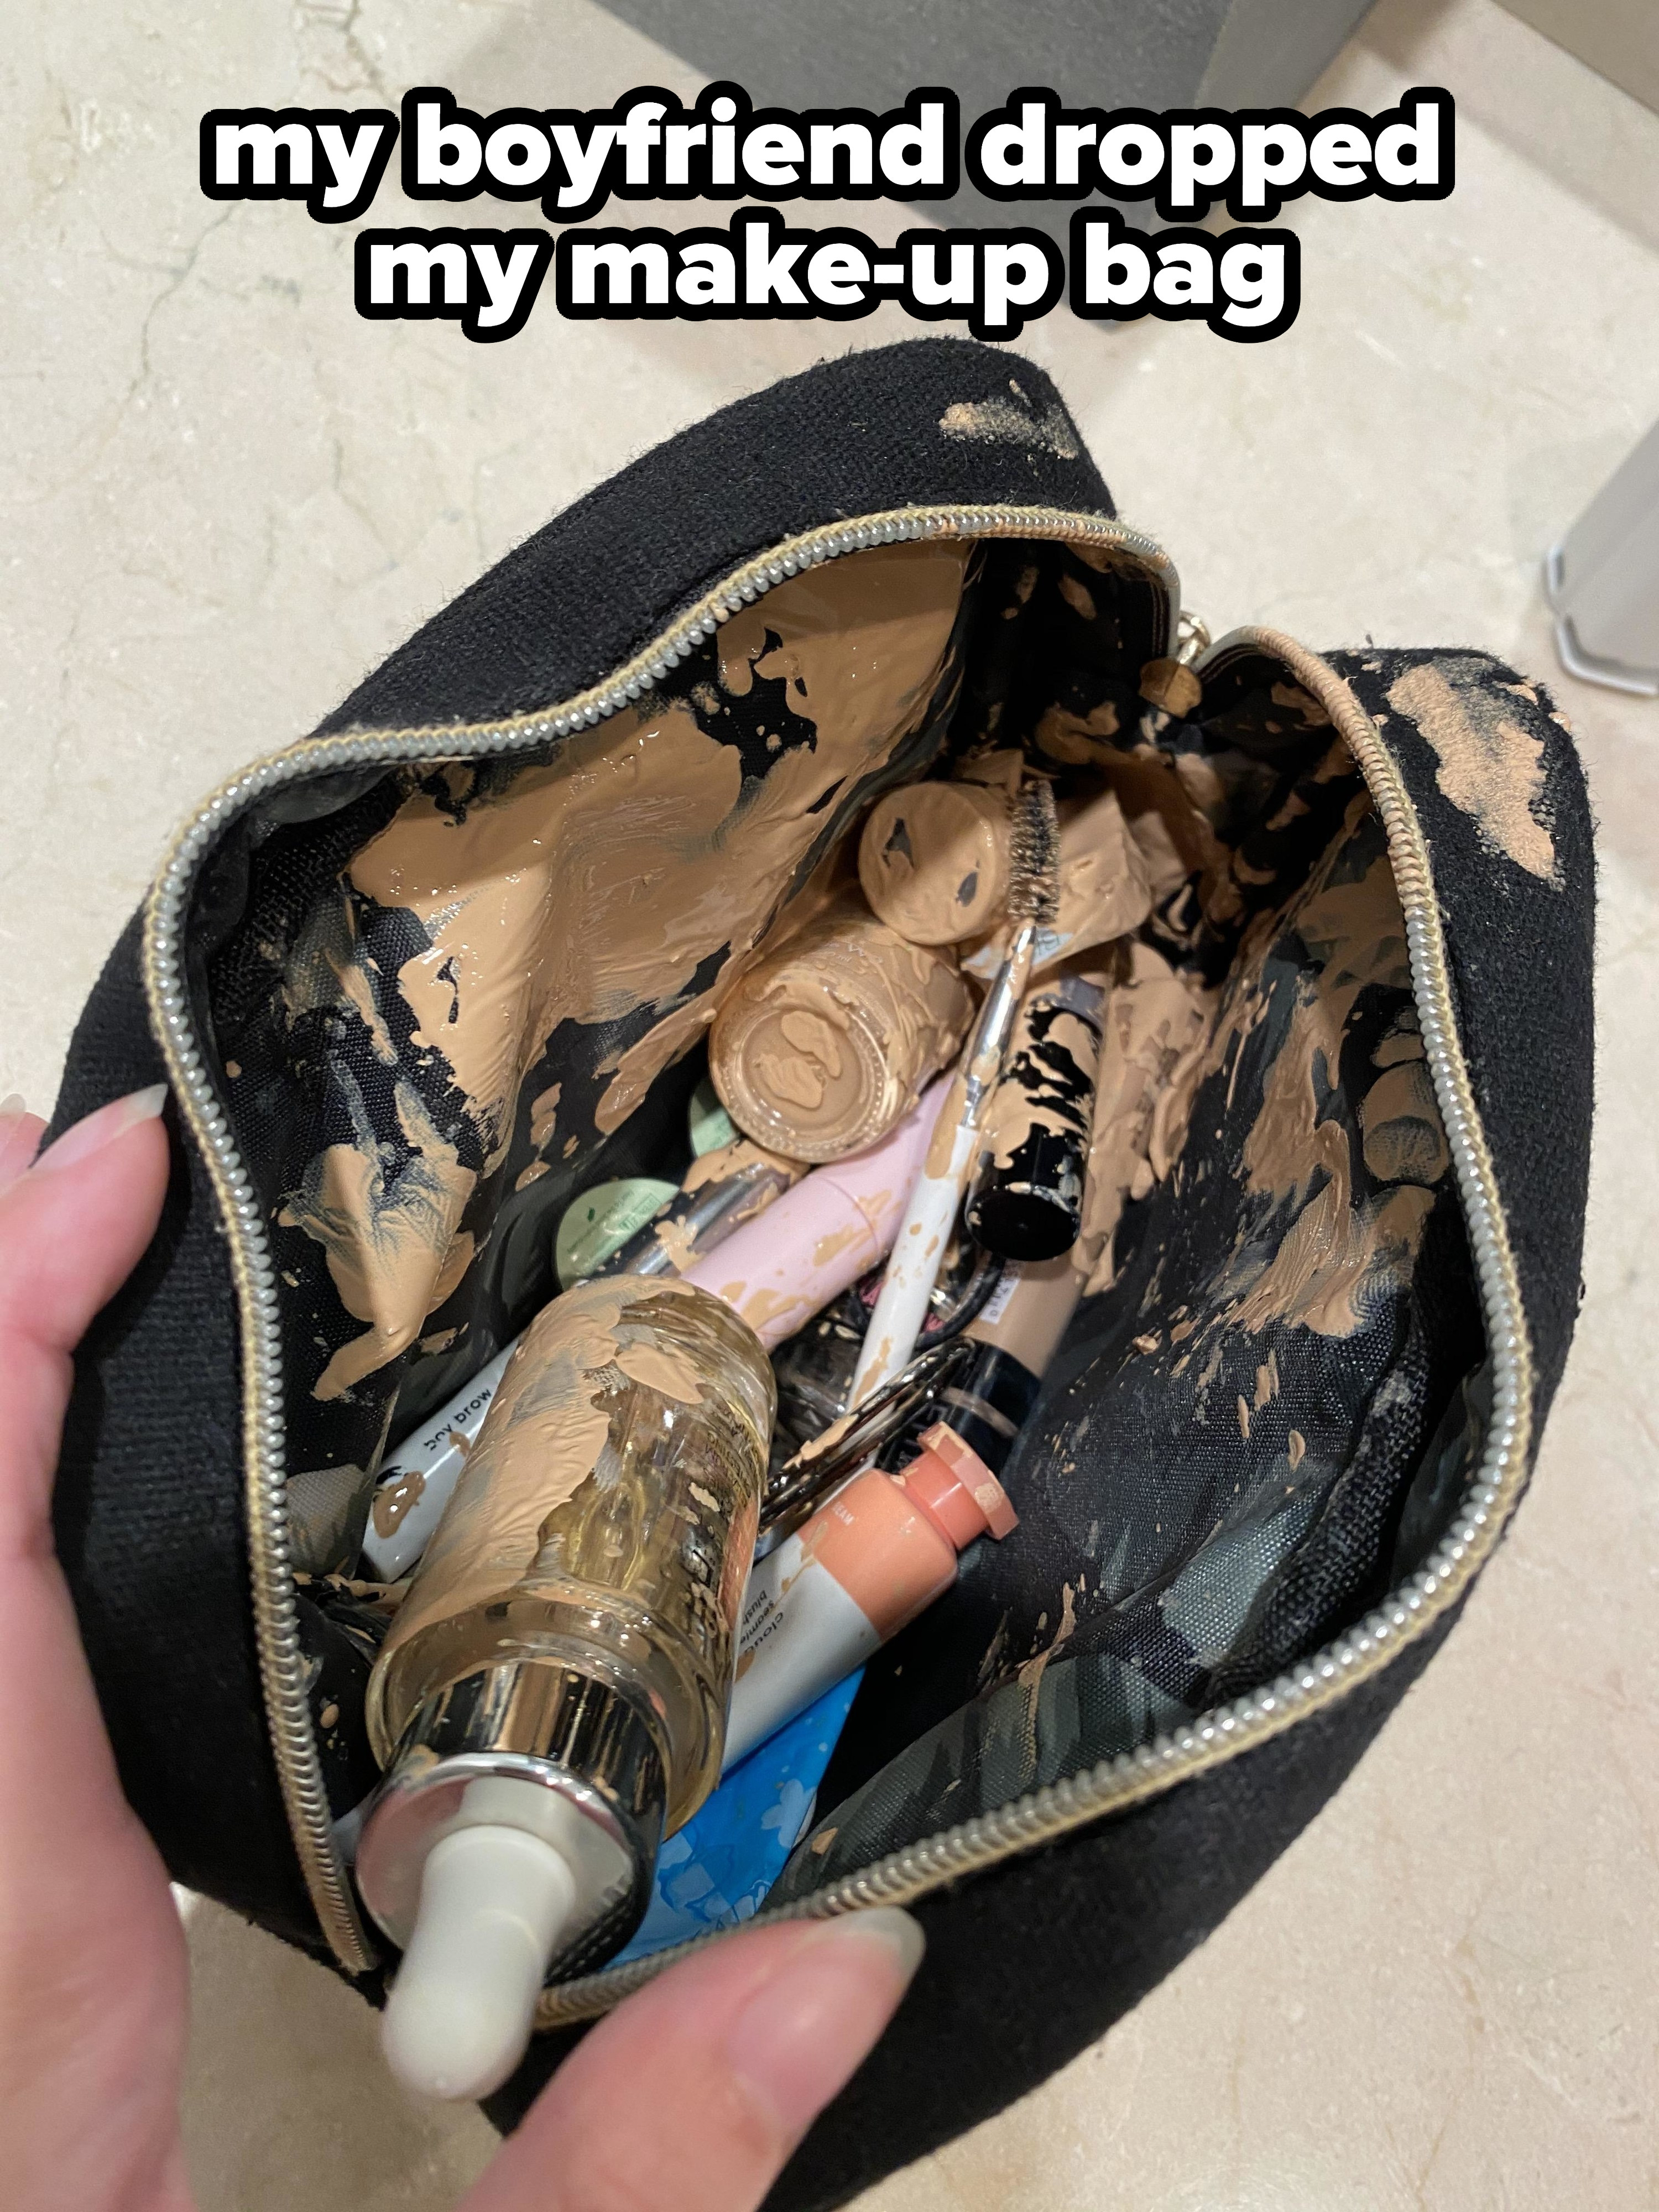 dropped make-up bag with brown goop in it